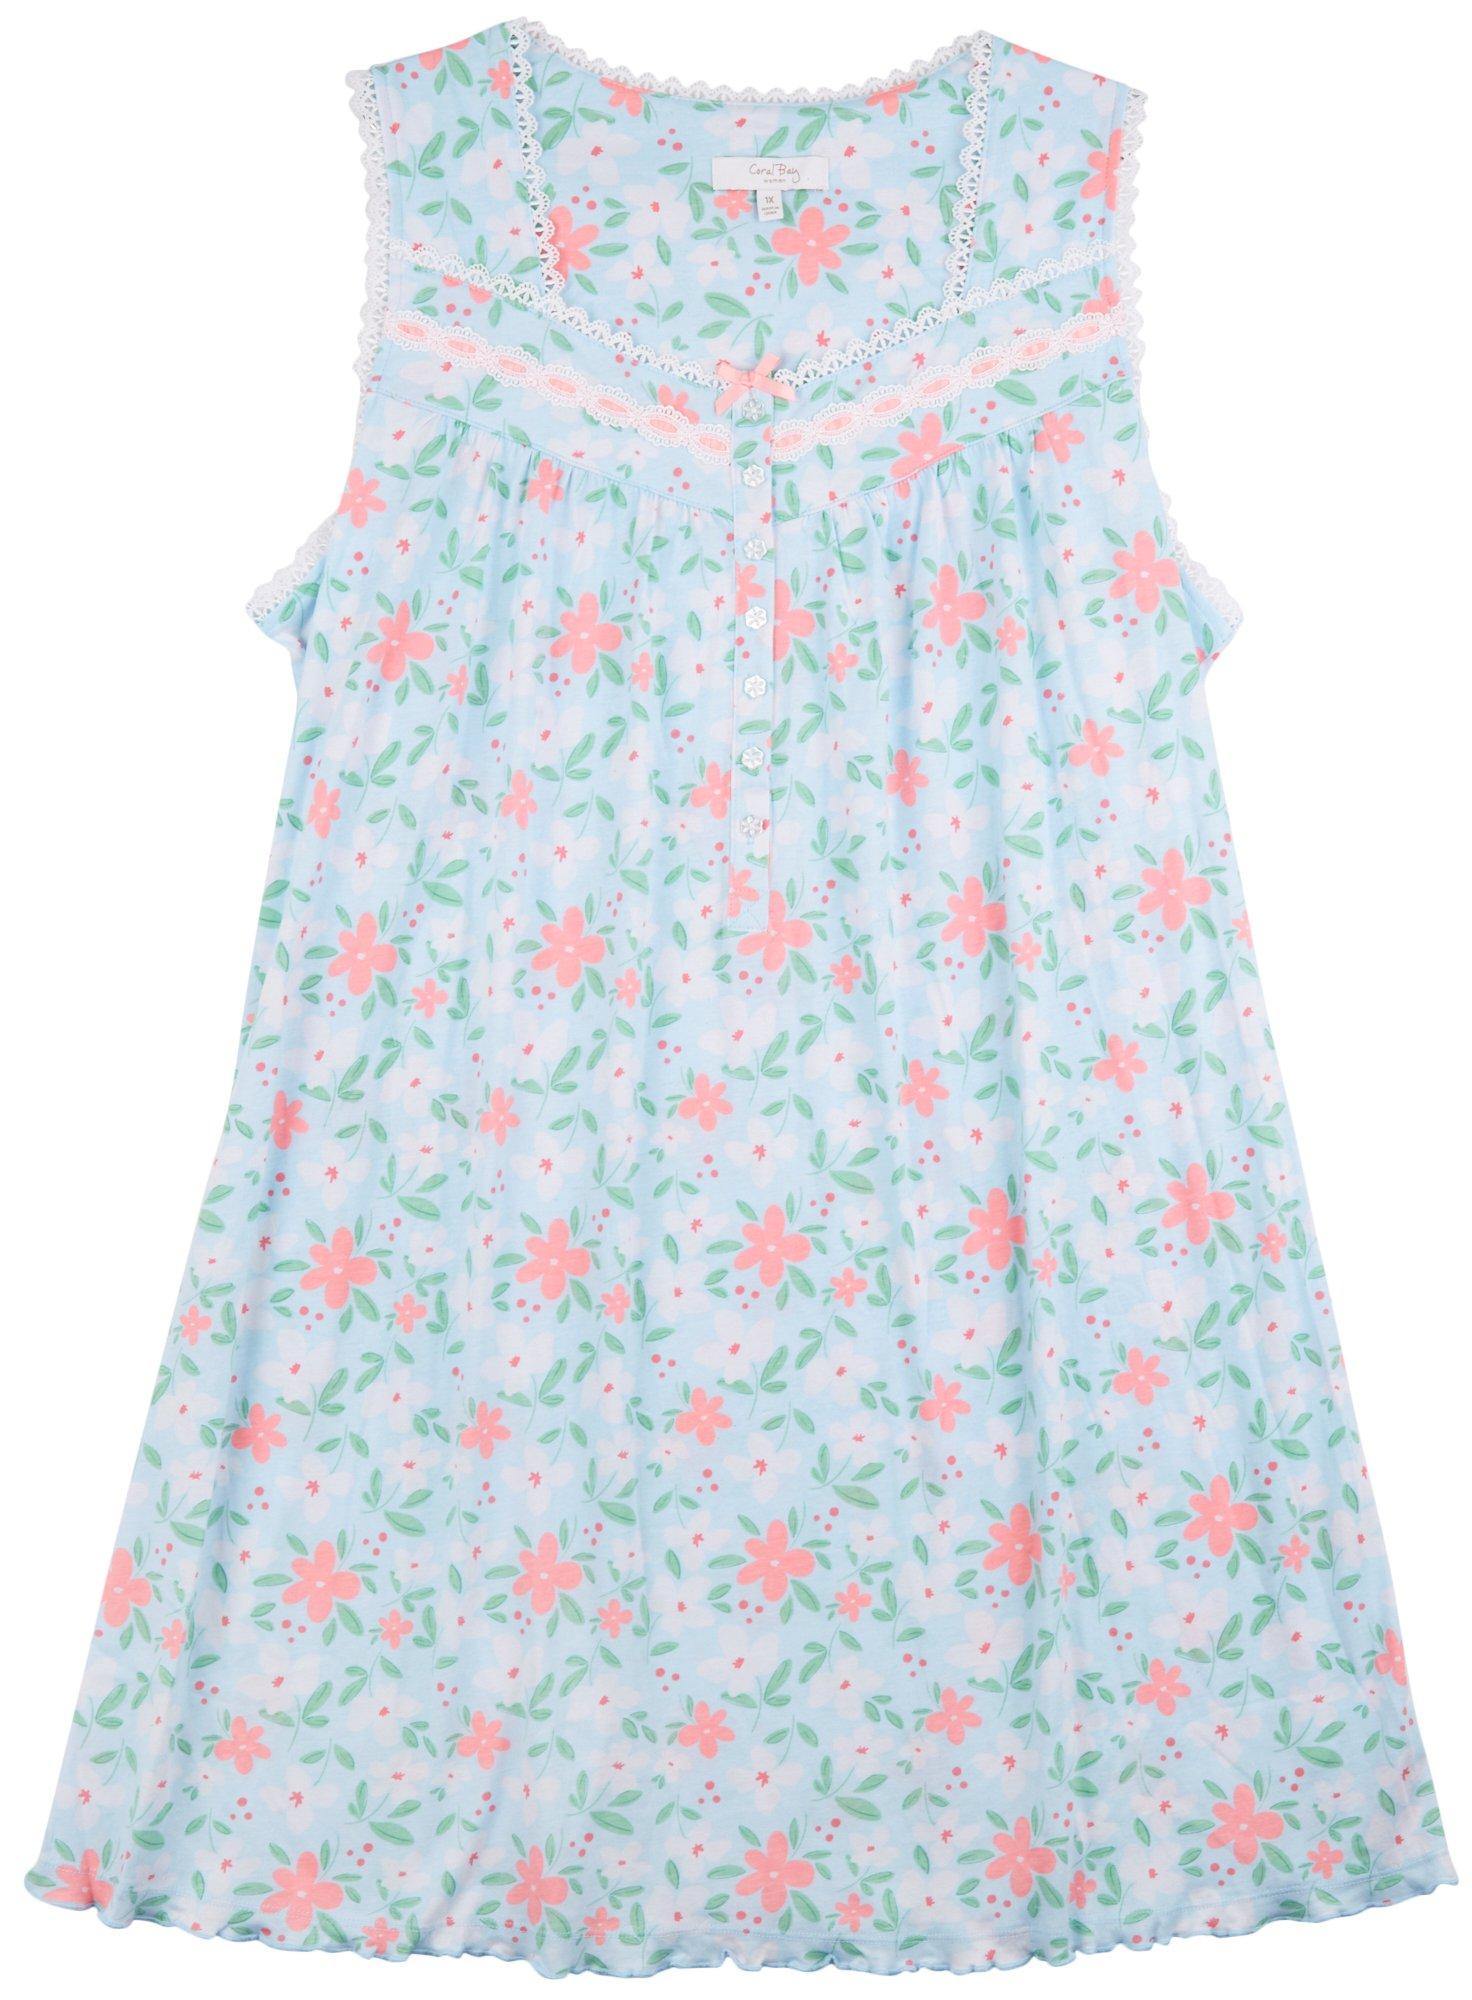 Coral Bay Plus 36 in. Floral Lace 100% Cotton Nightgown